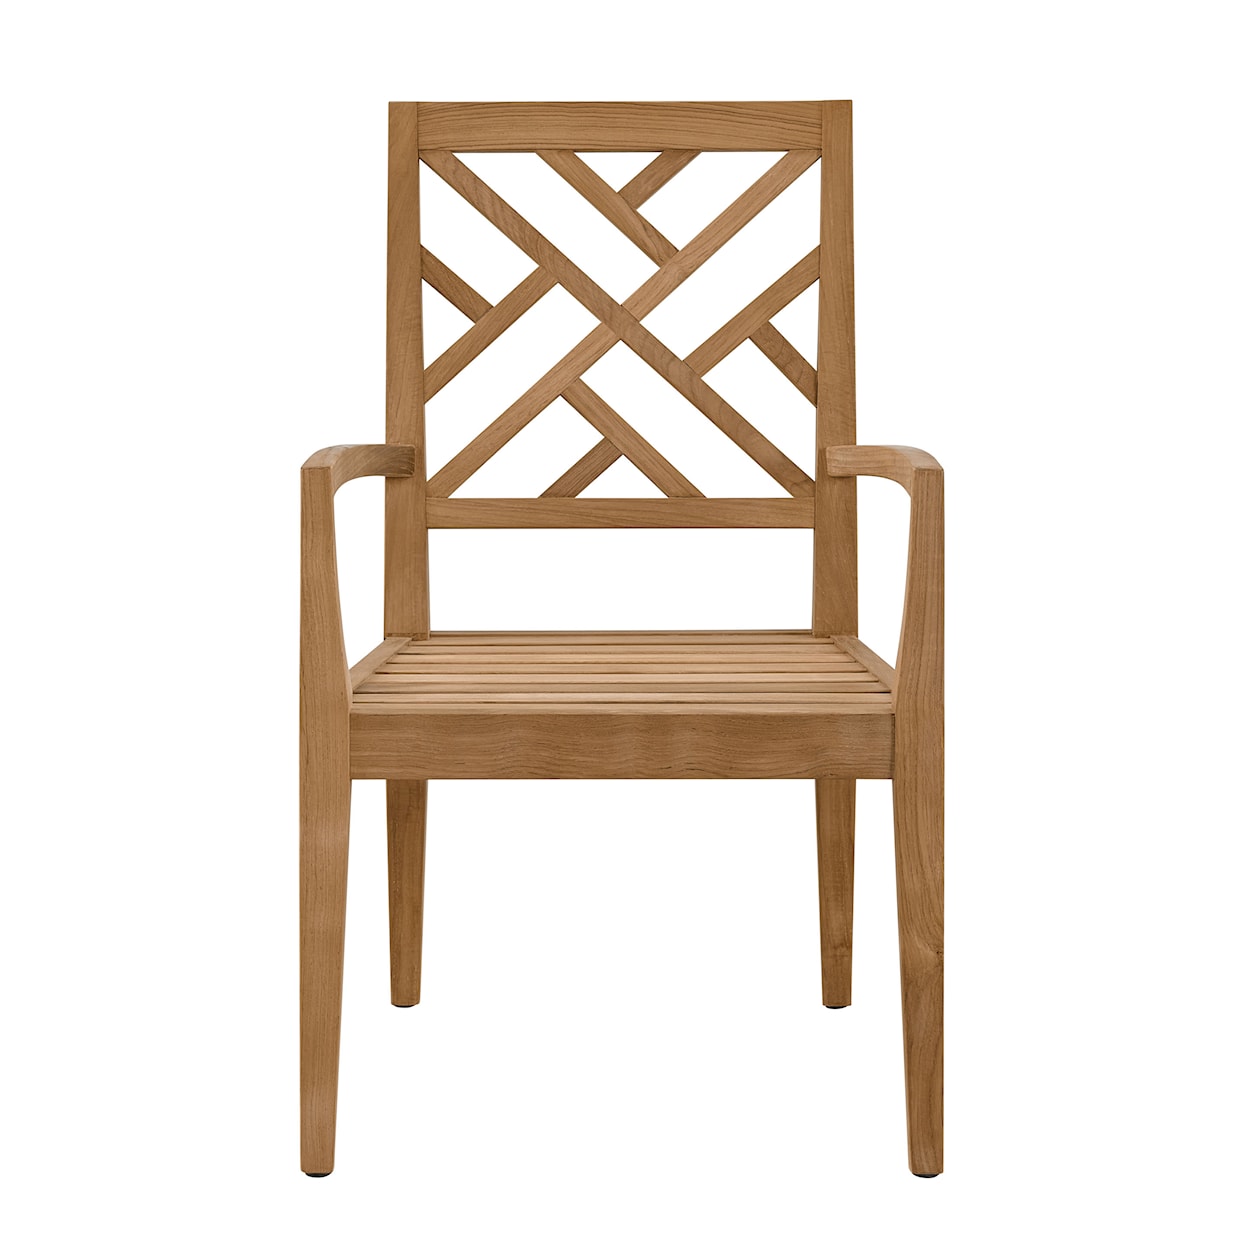 Universal Coastal Living Outdoor Outdoor Chesapeake Fret Back Arm Chair 